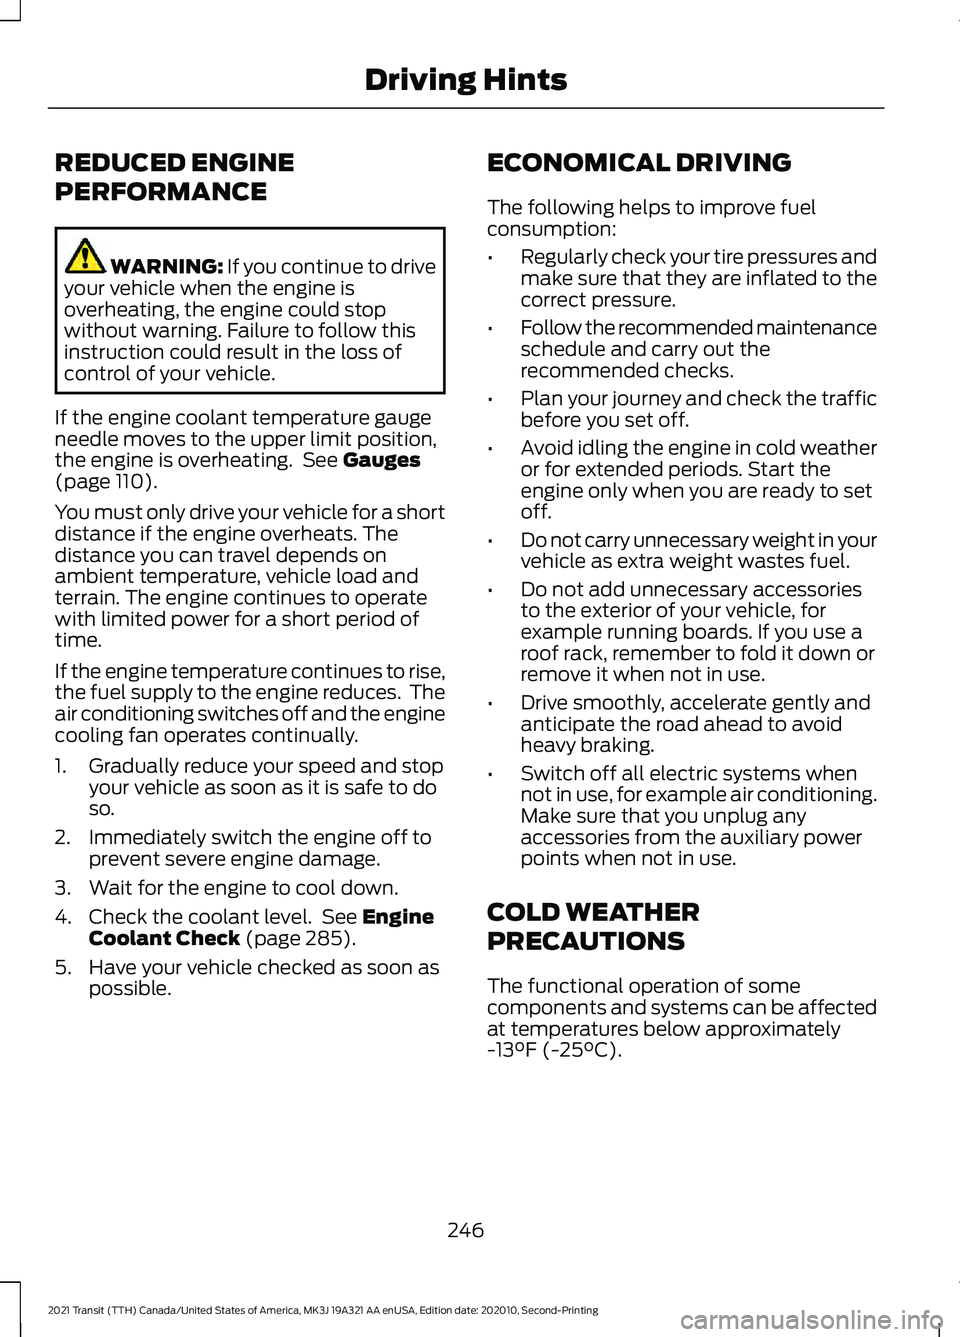 FORD TRANSIT 2021  Owners Manual REDUCED ENGINE
PERFORMANCE
WARNING: If you continue to drive
your vehicle when the engine is
overheating, the engine could stop
without warning. Failure to follow this
instruction could result in the 